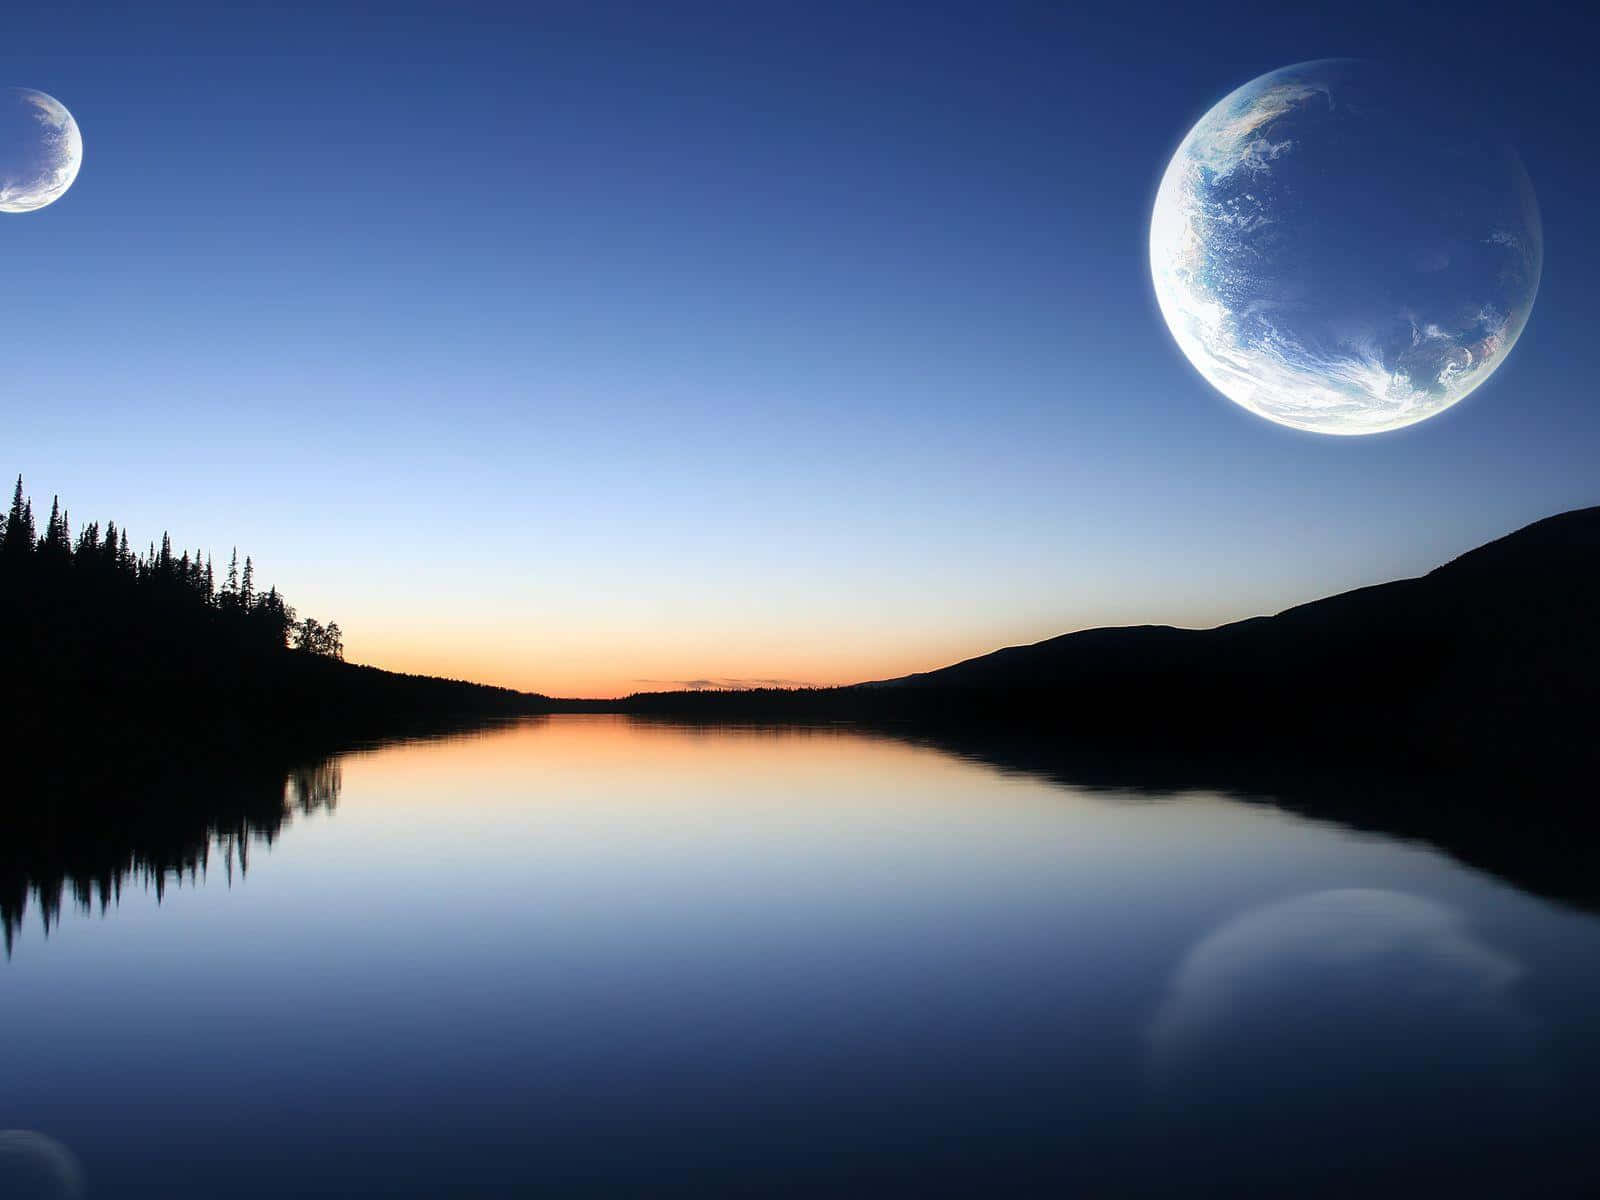 Moon And Planets In The Water Wallpaper